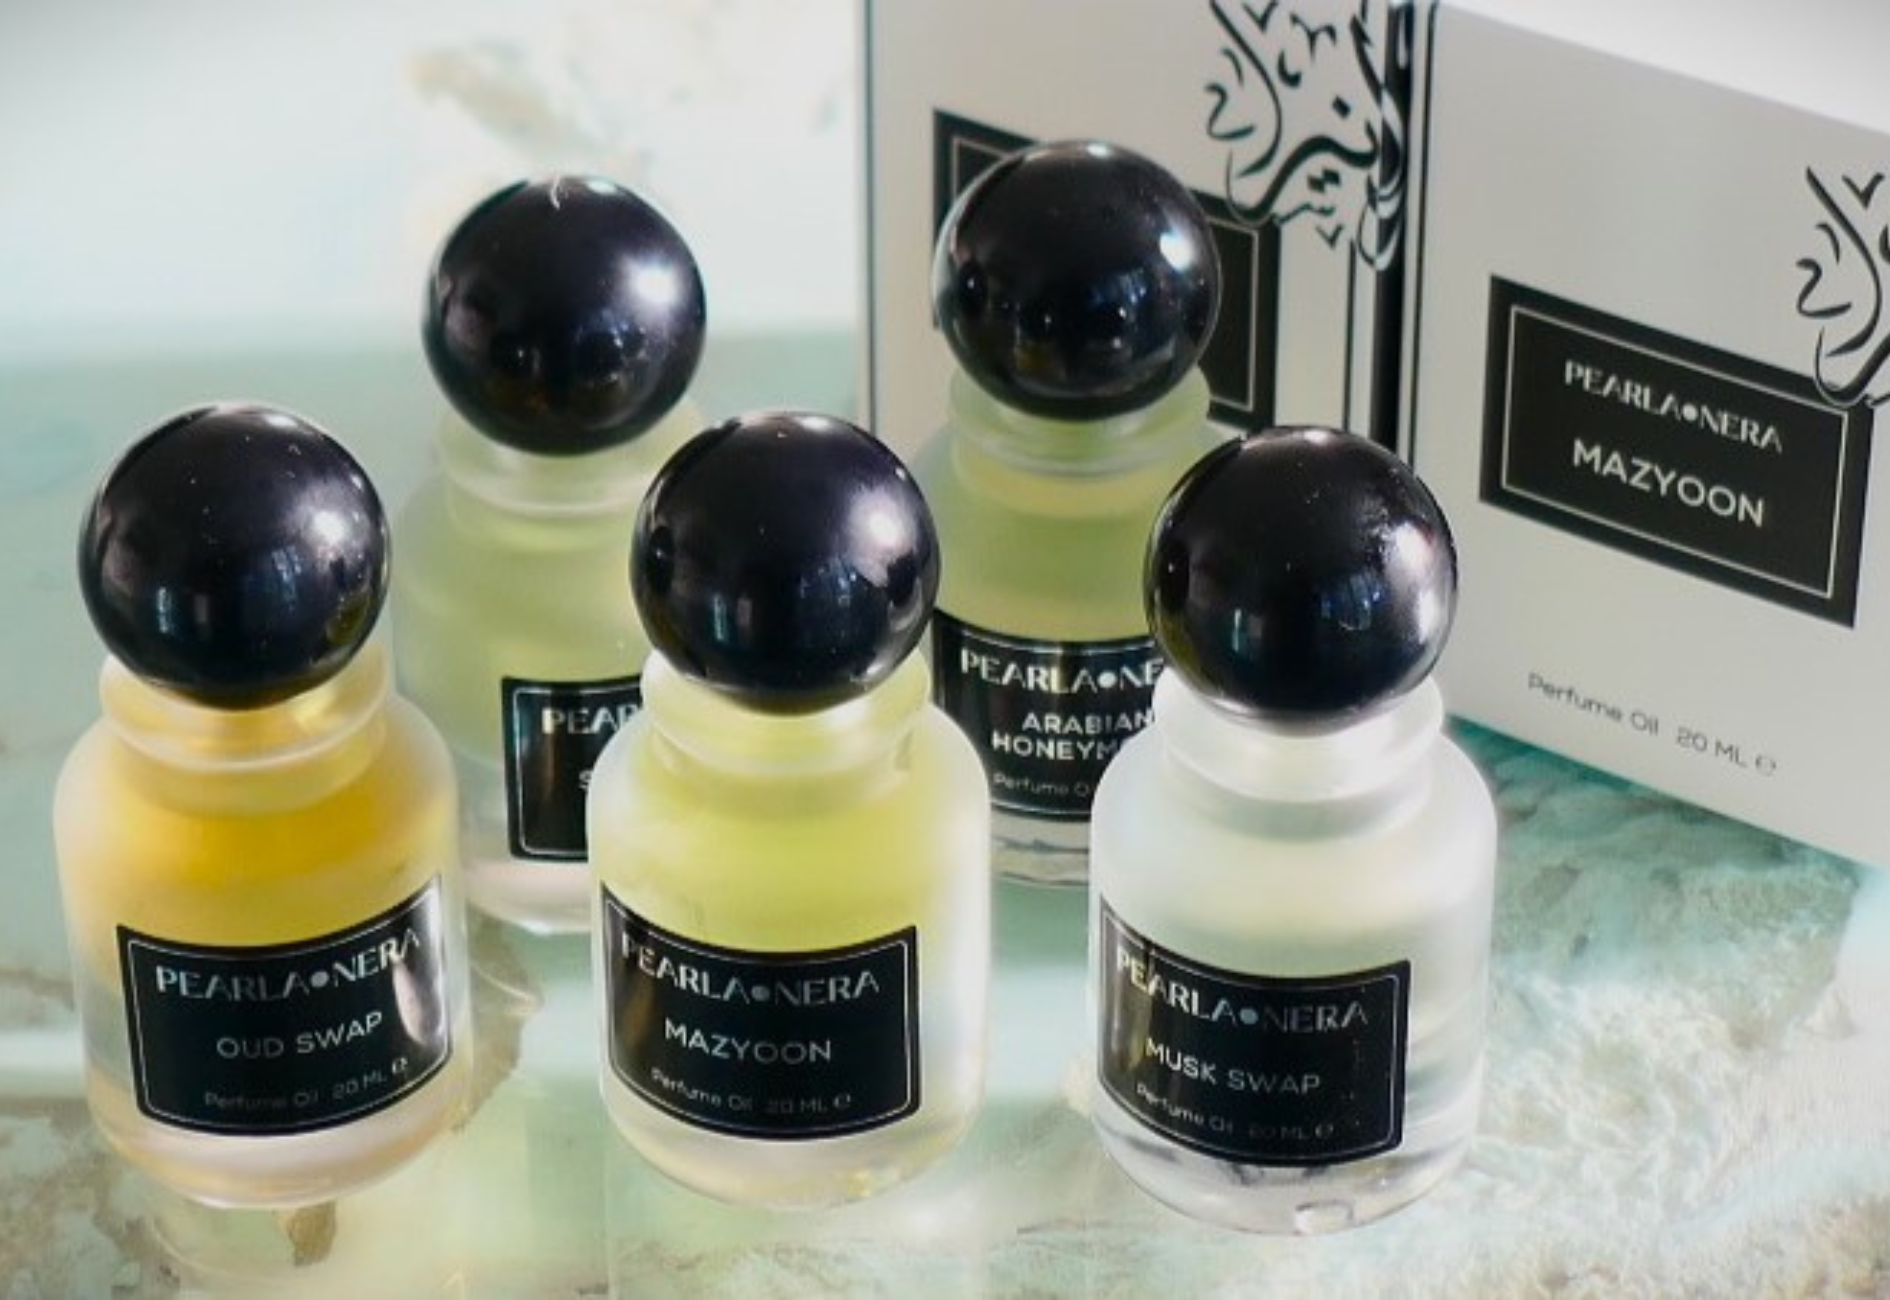 PEARLANERA's New Concentrated Perfume Oils Collection - Maison d